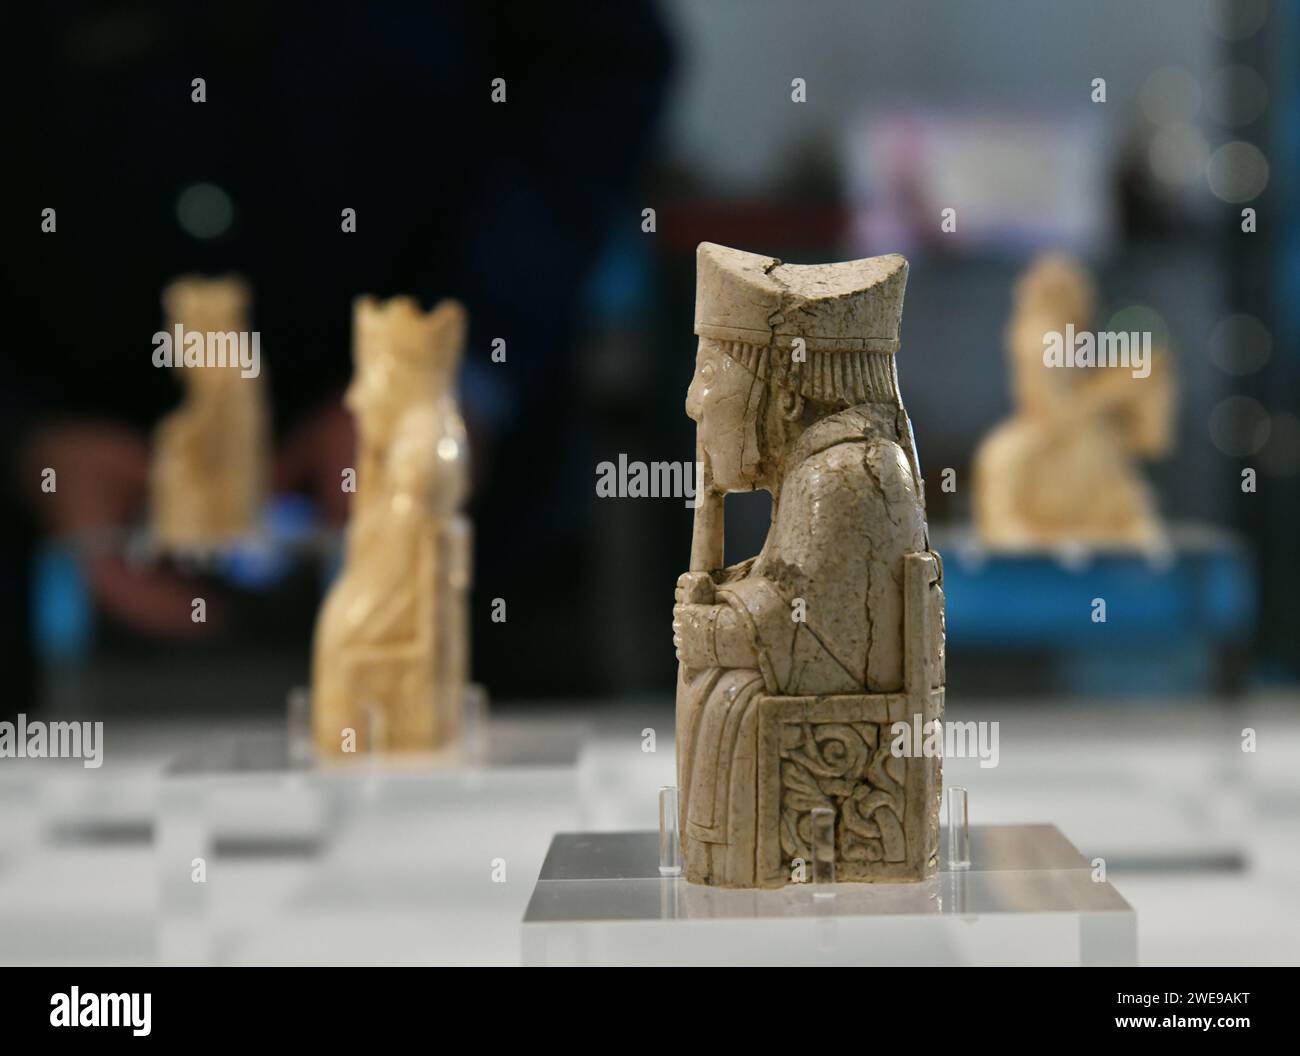 Chess pieces from the Lewis chessmen collection Stock Photo